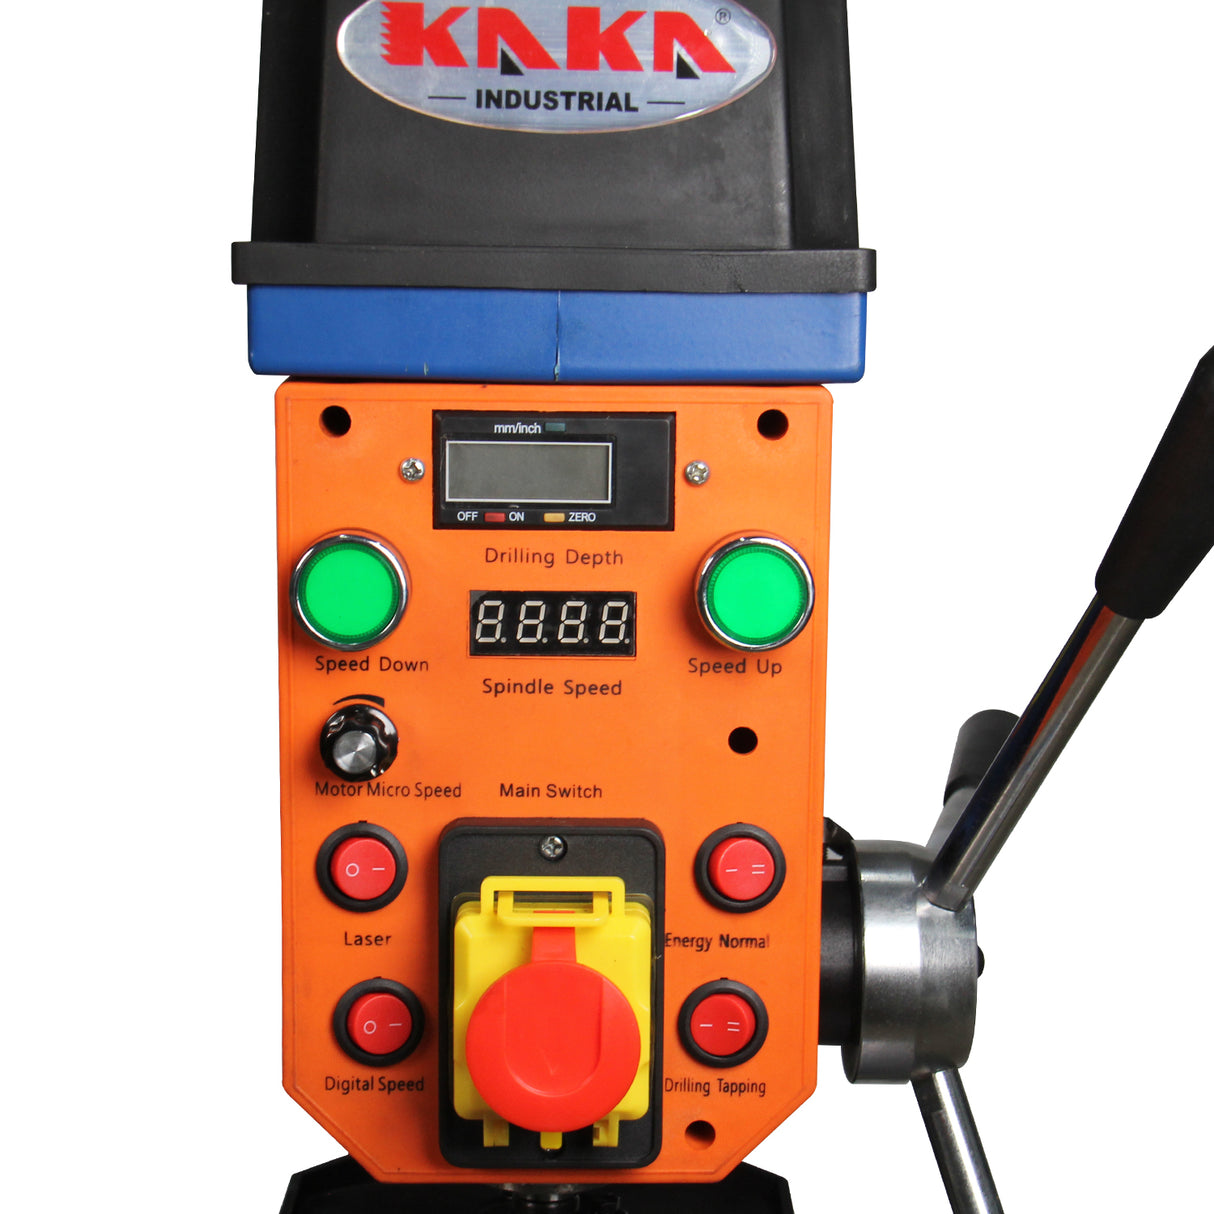 Kaka industrial DP-16 - 5/8" Variable-Speed Benchtop Drill Press with Laser, Bench Top Drill Press for Metal and Wood Working